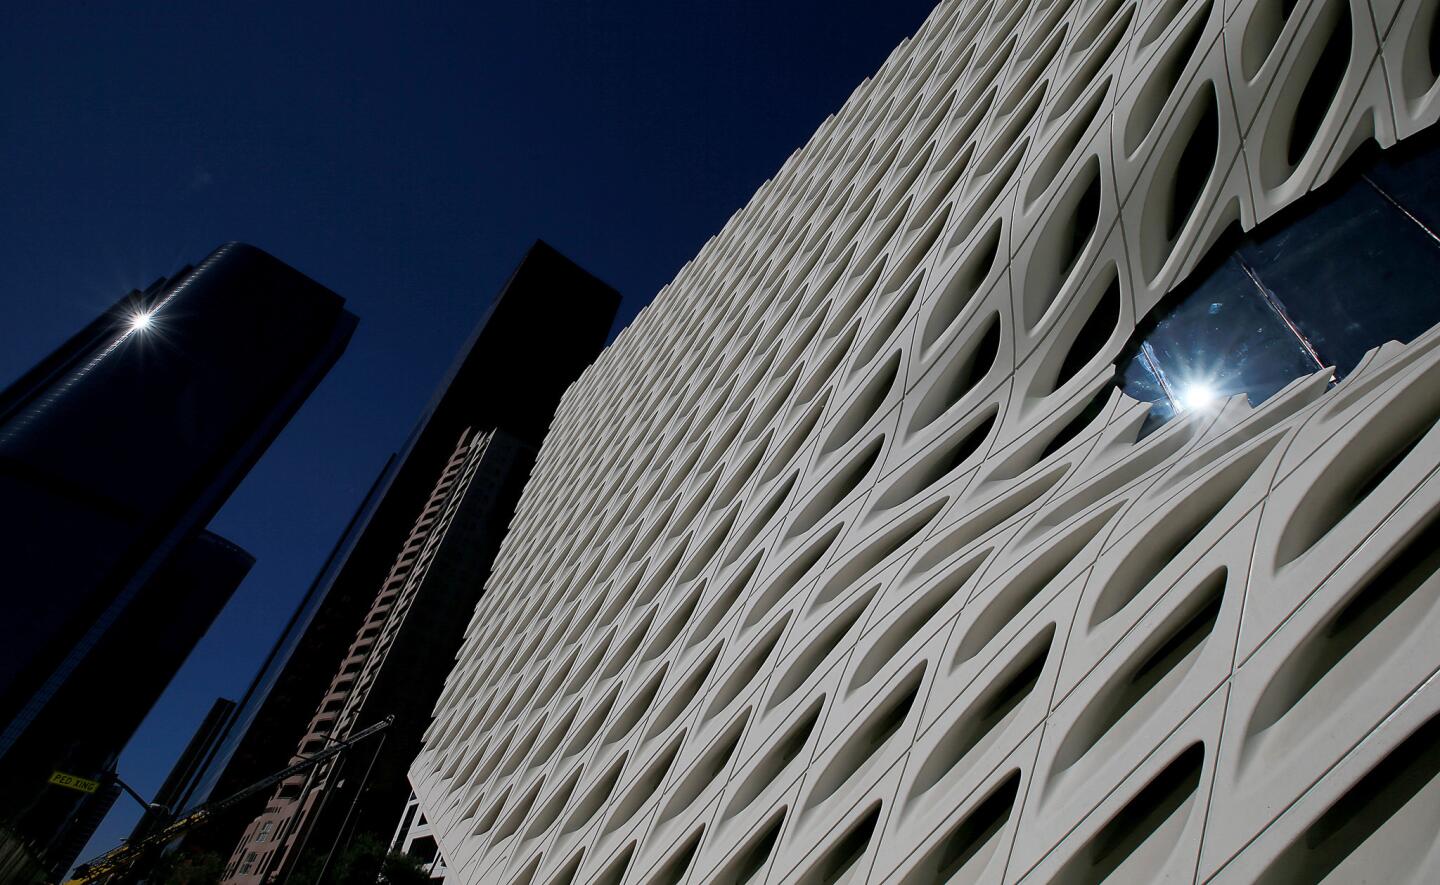 The Broad Museum